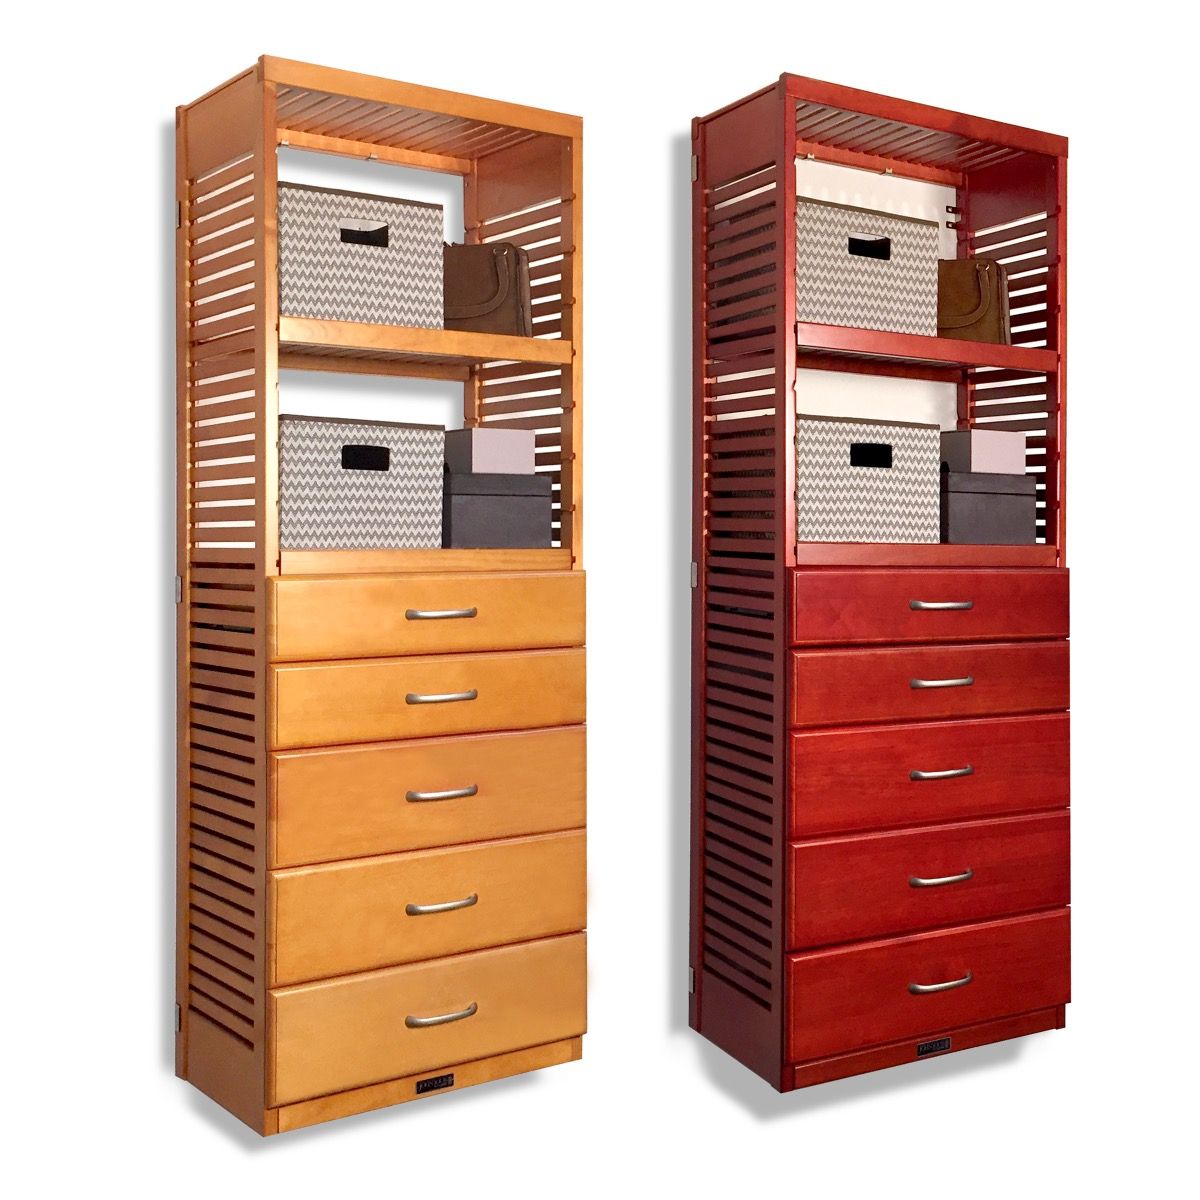 16in. Deep 6ft. Tower with drawers | John Louis Home